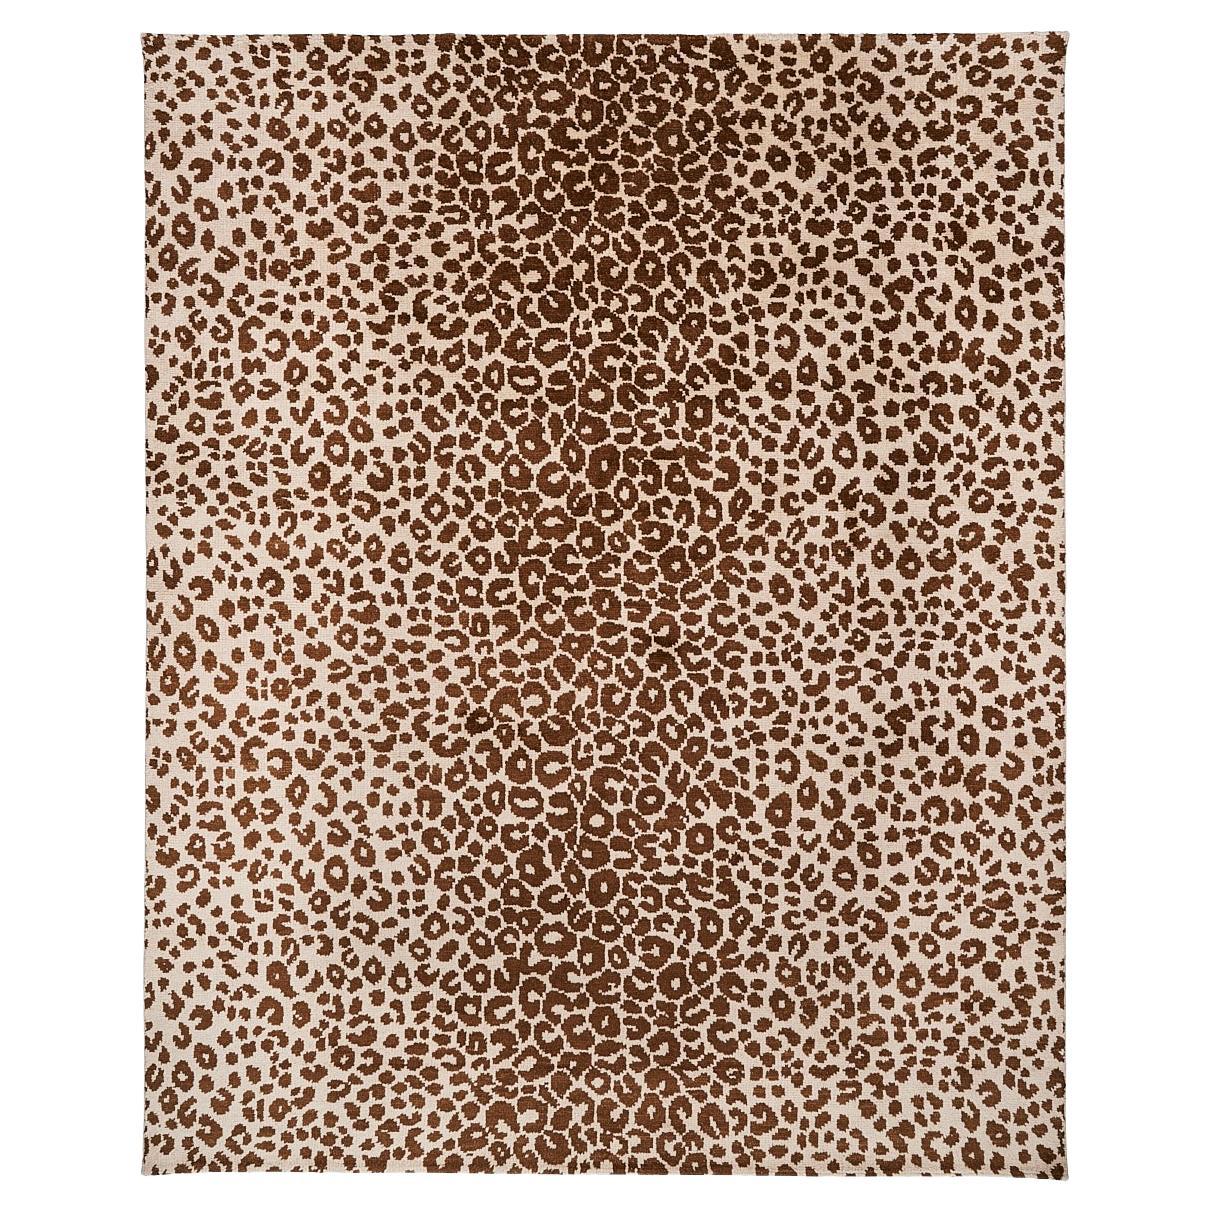 Schumacher Iconic Leopard 8' x 10' Rug In Brown For Sale